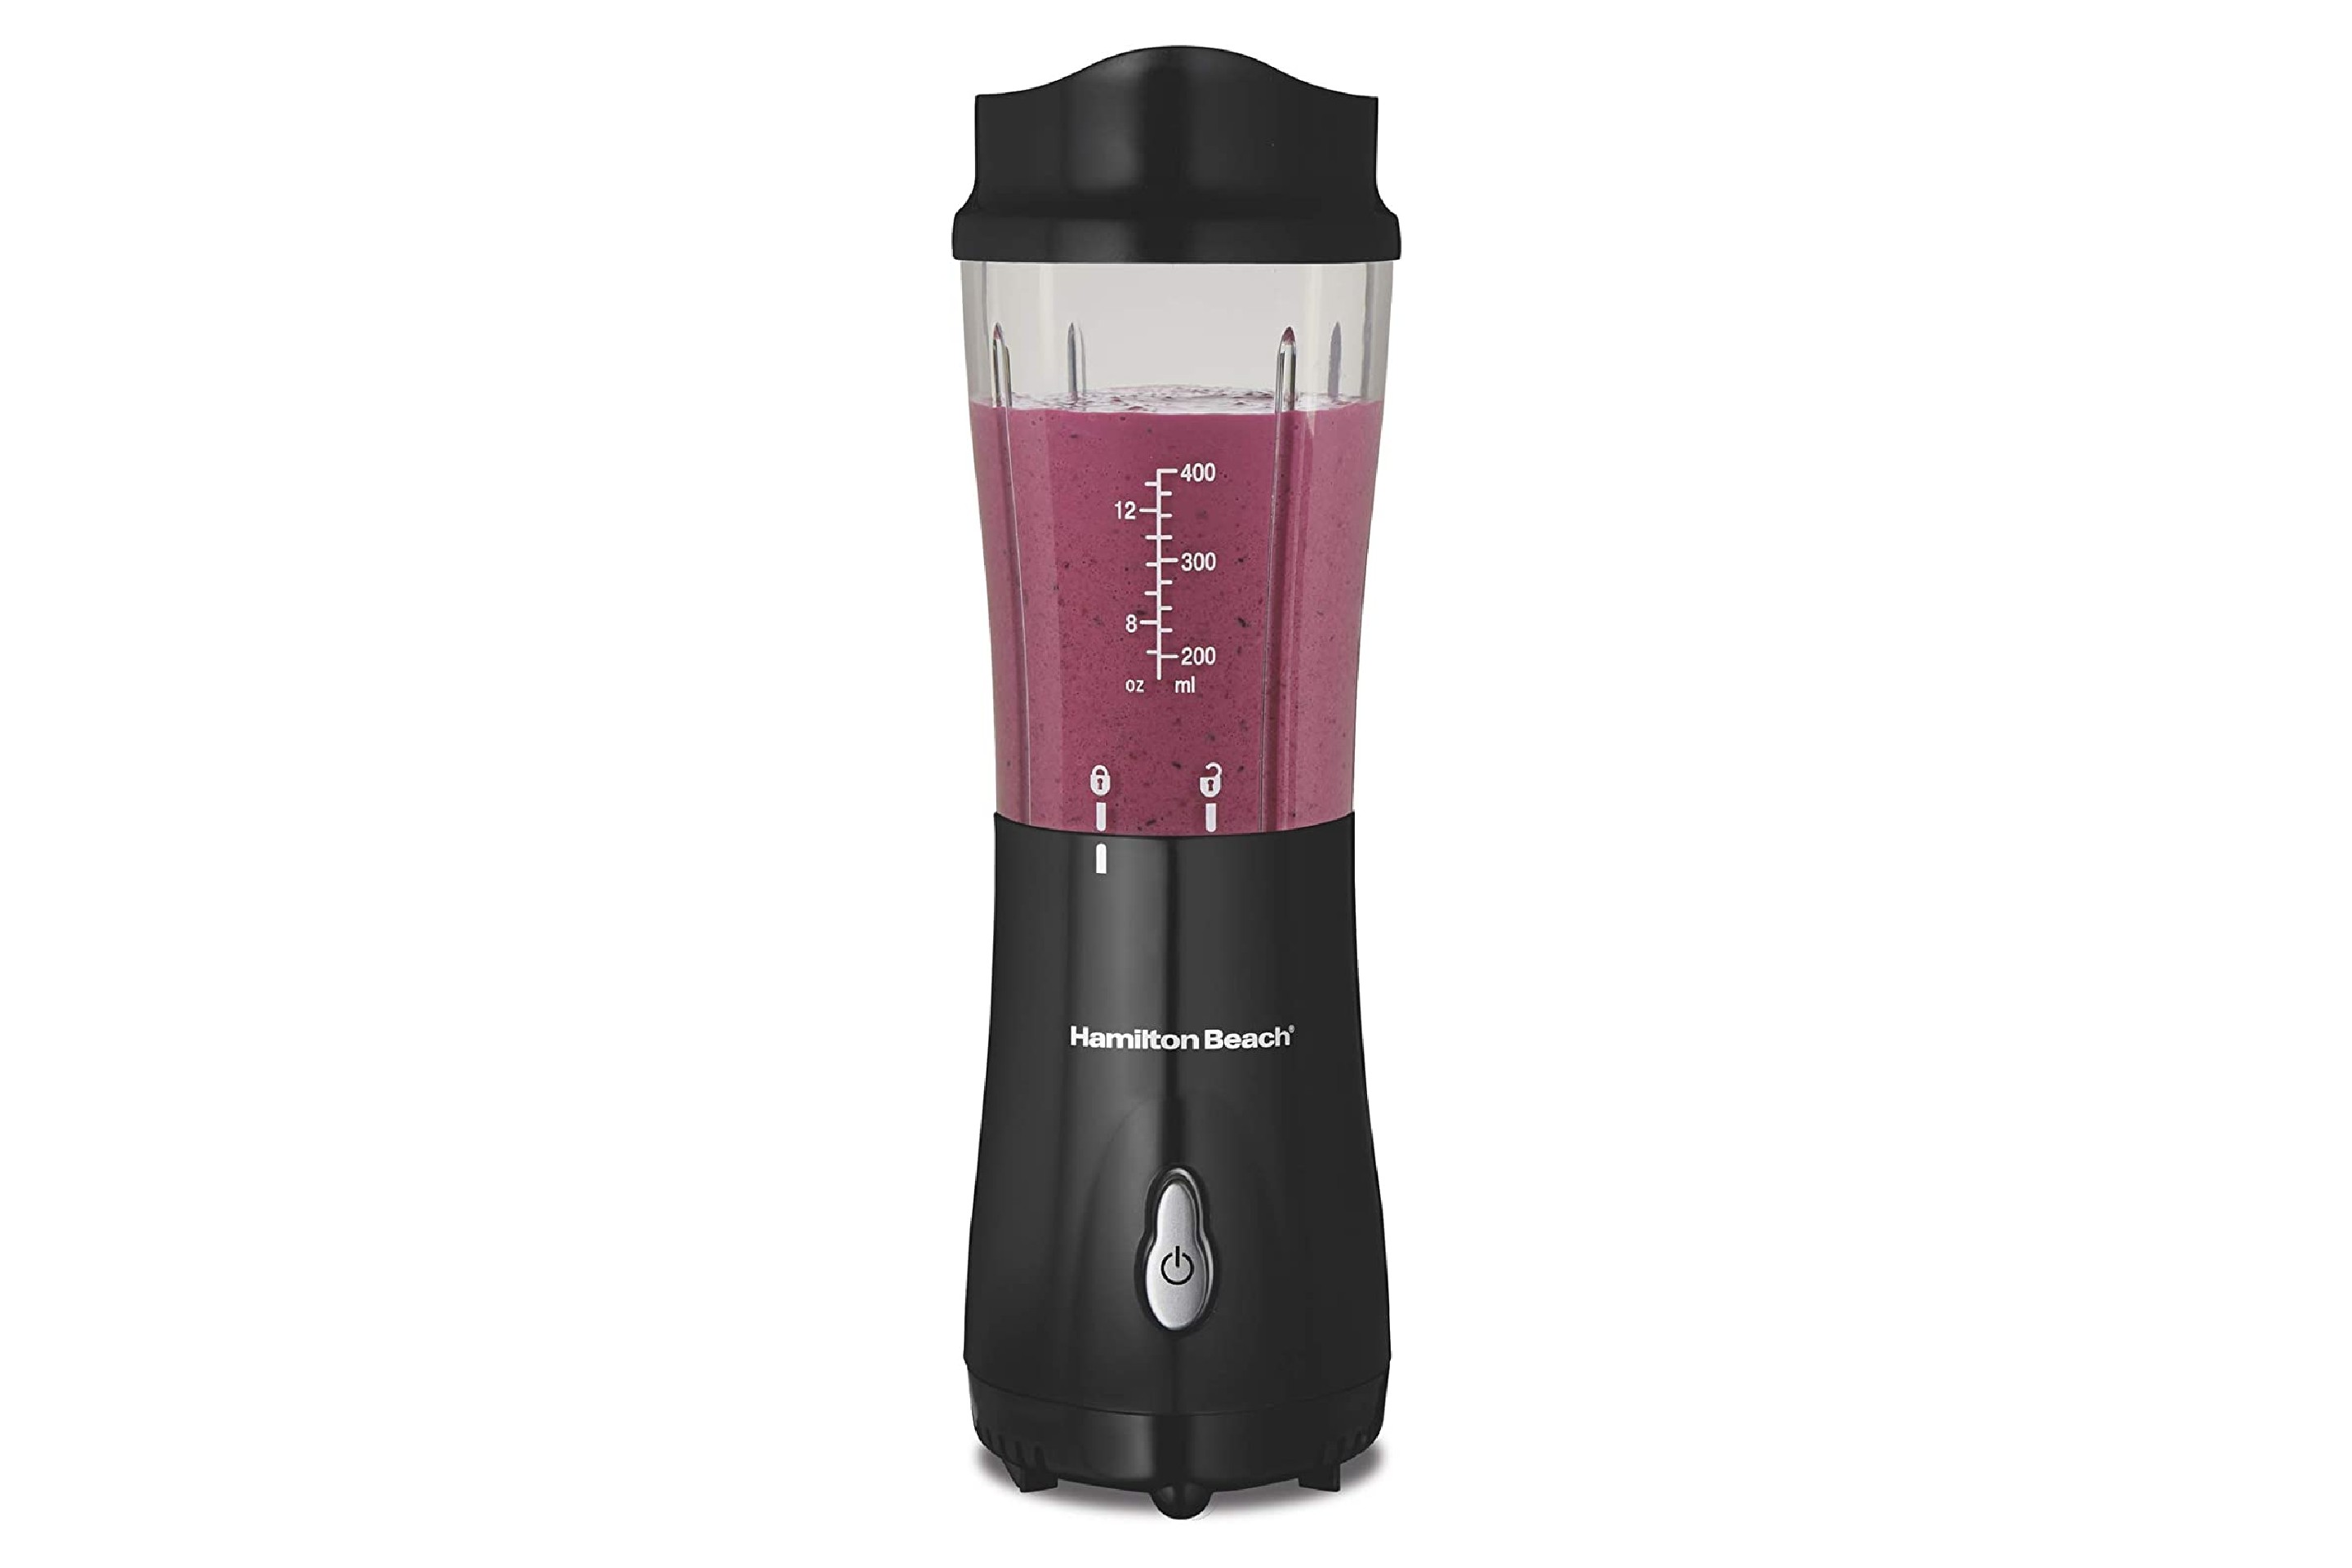 La Reveuse Personal Size Blender 300 Watts Power for Shakes